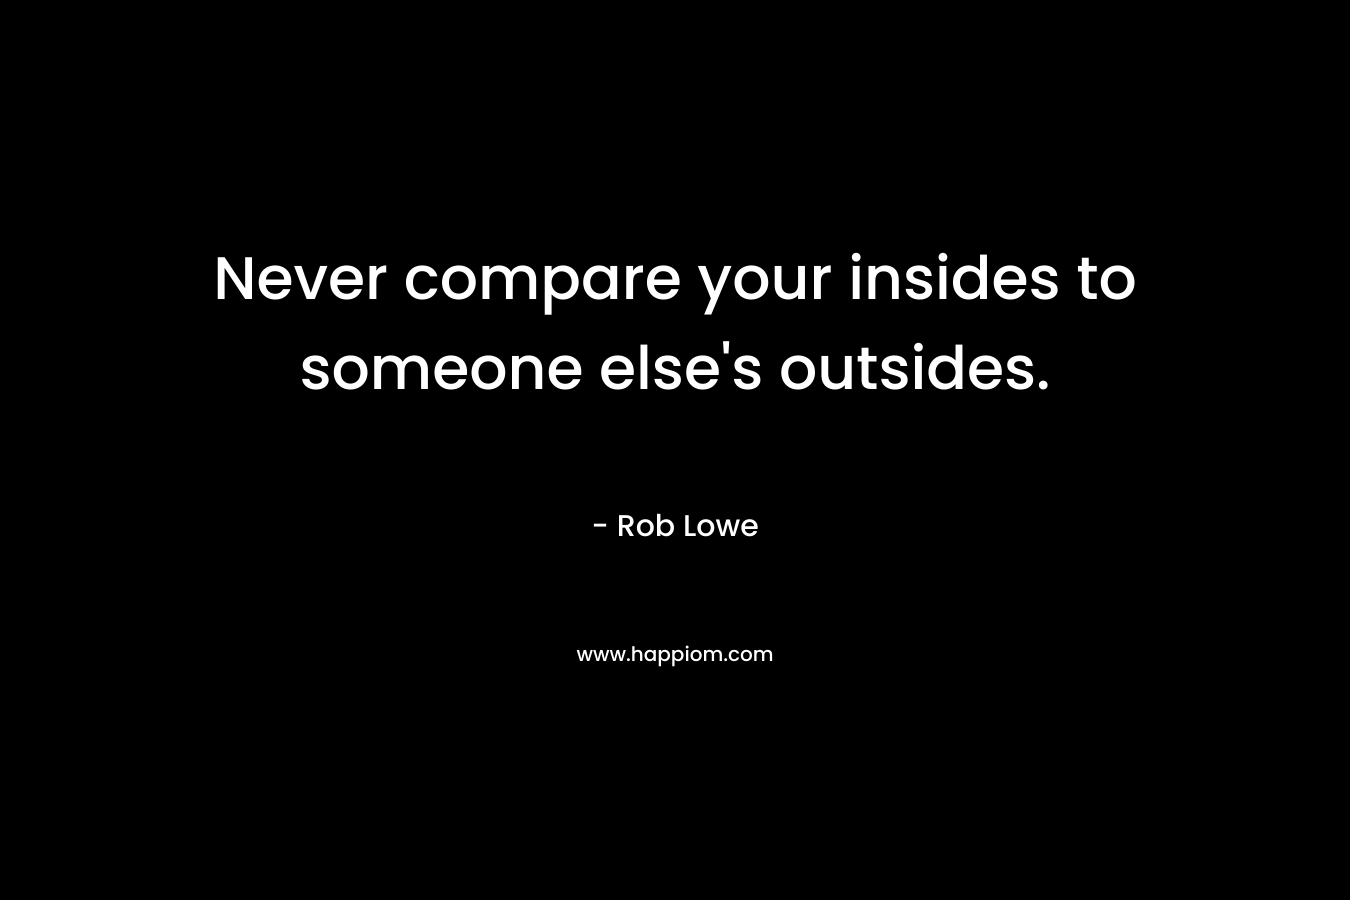 Never compare your insides to someone else’s outsides. – Rob Lowe